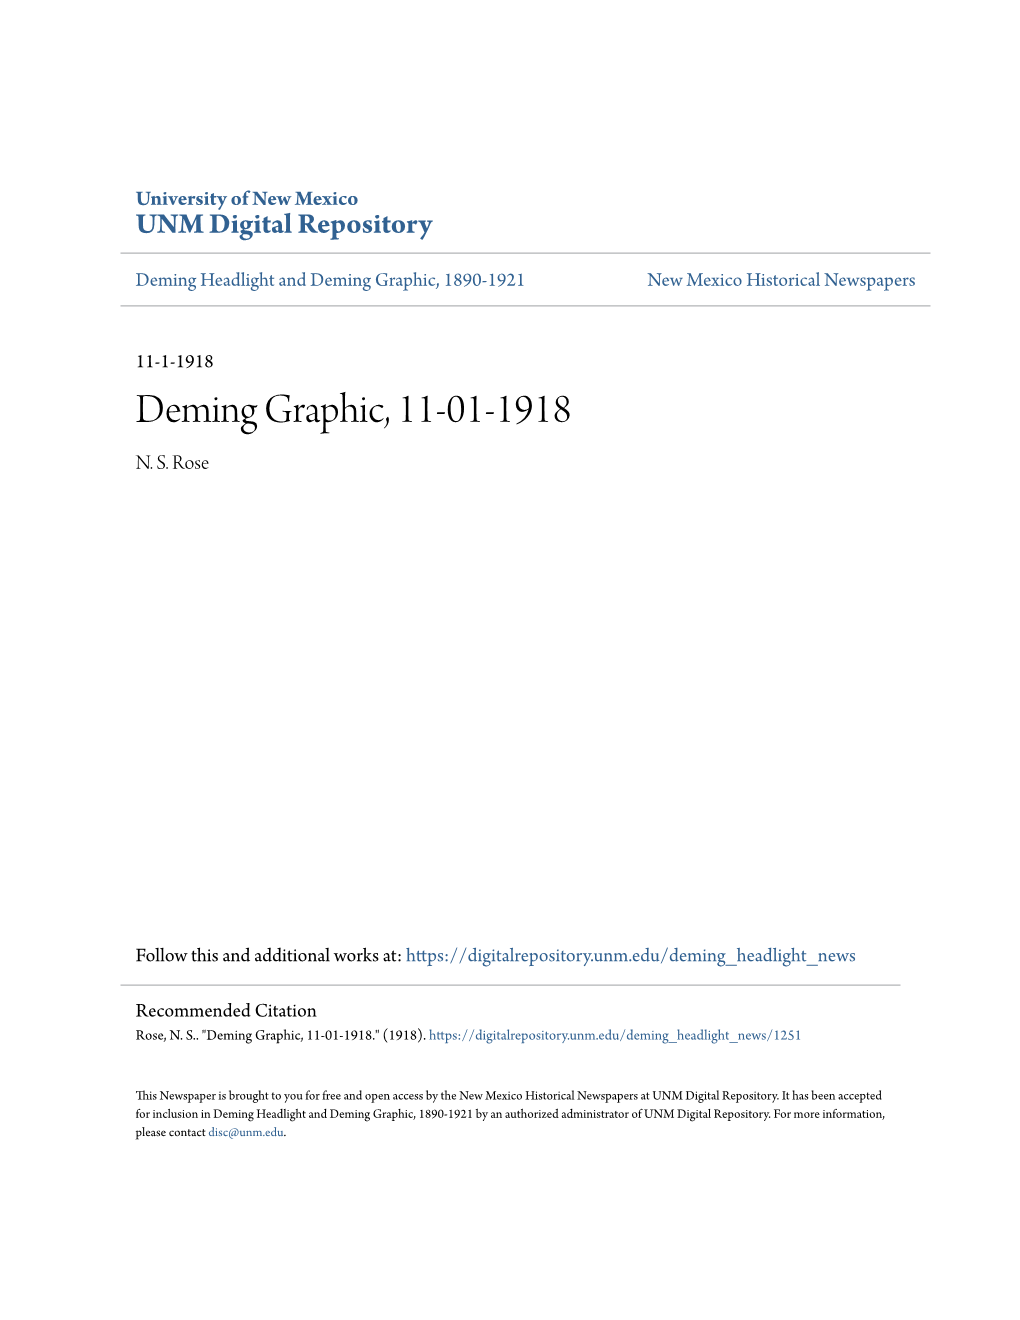 Deming Graphic, 11-01-1918 N